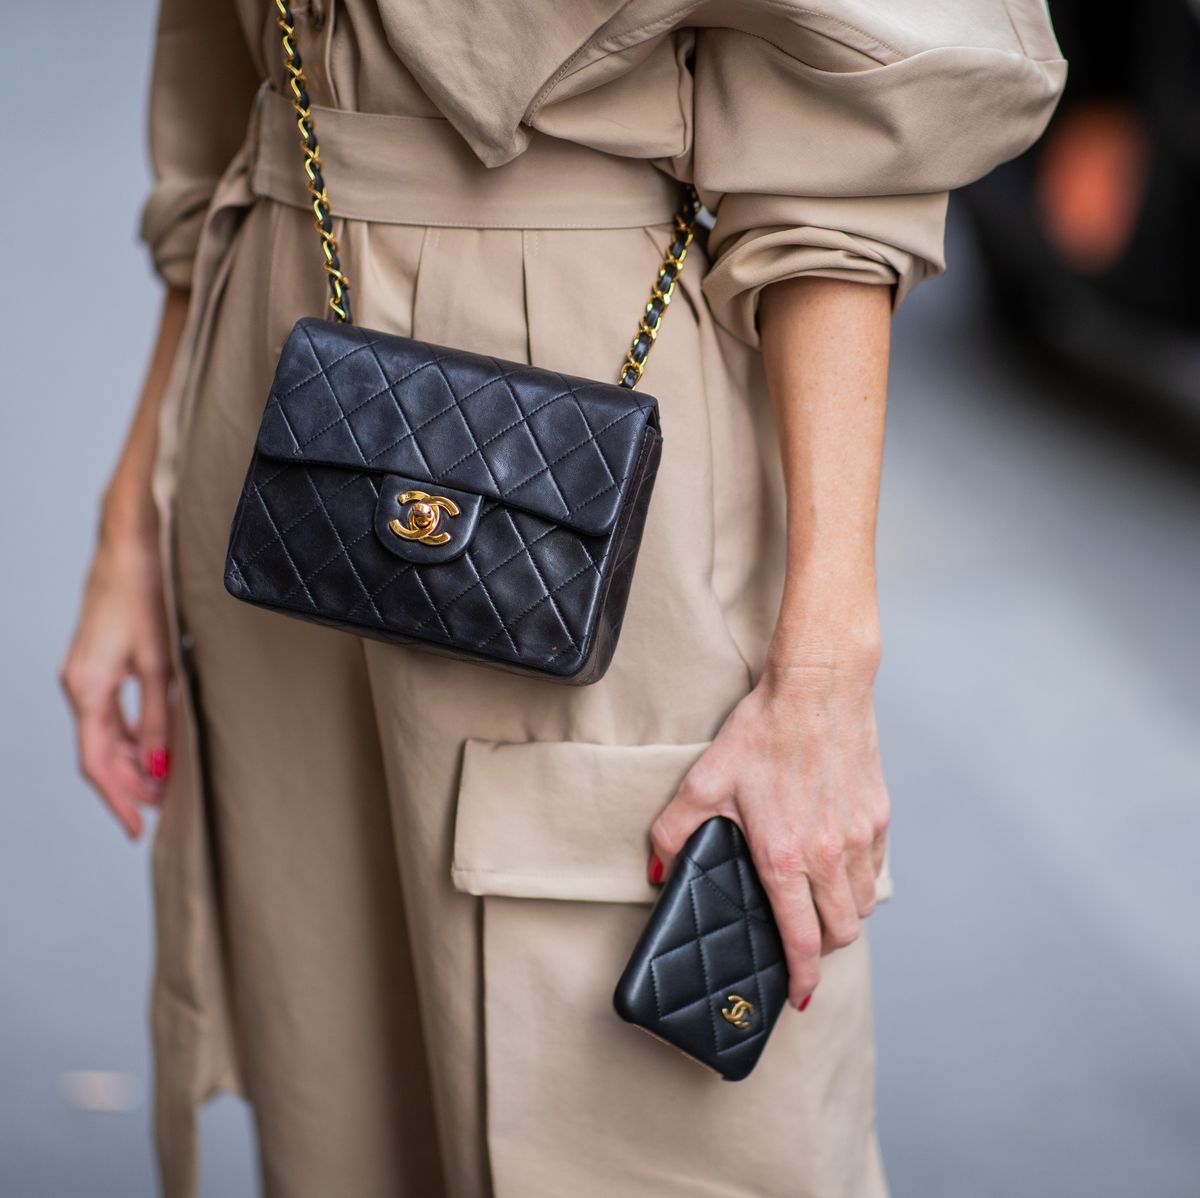 Vintage Chanel Handbags Are Currently Discounted In The Farfetch Cyber  Monday Sale